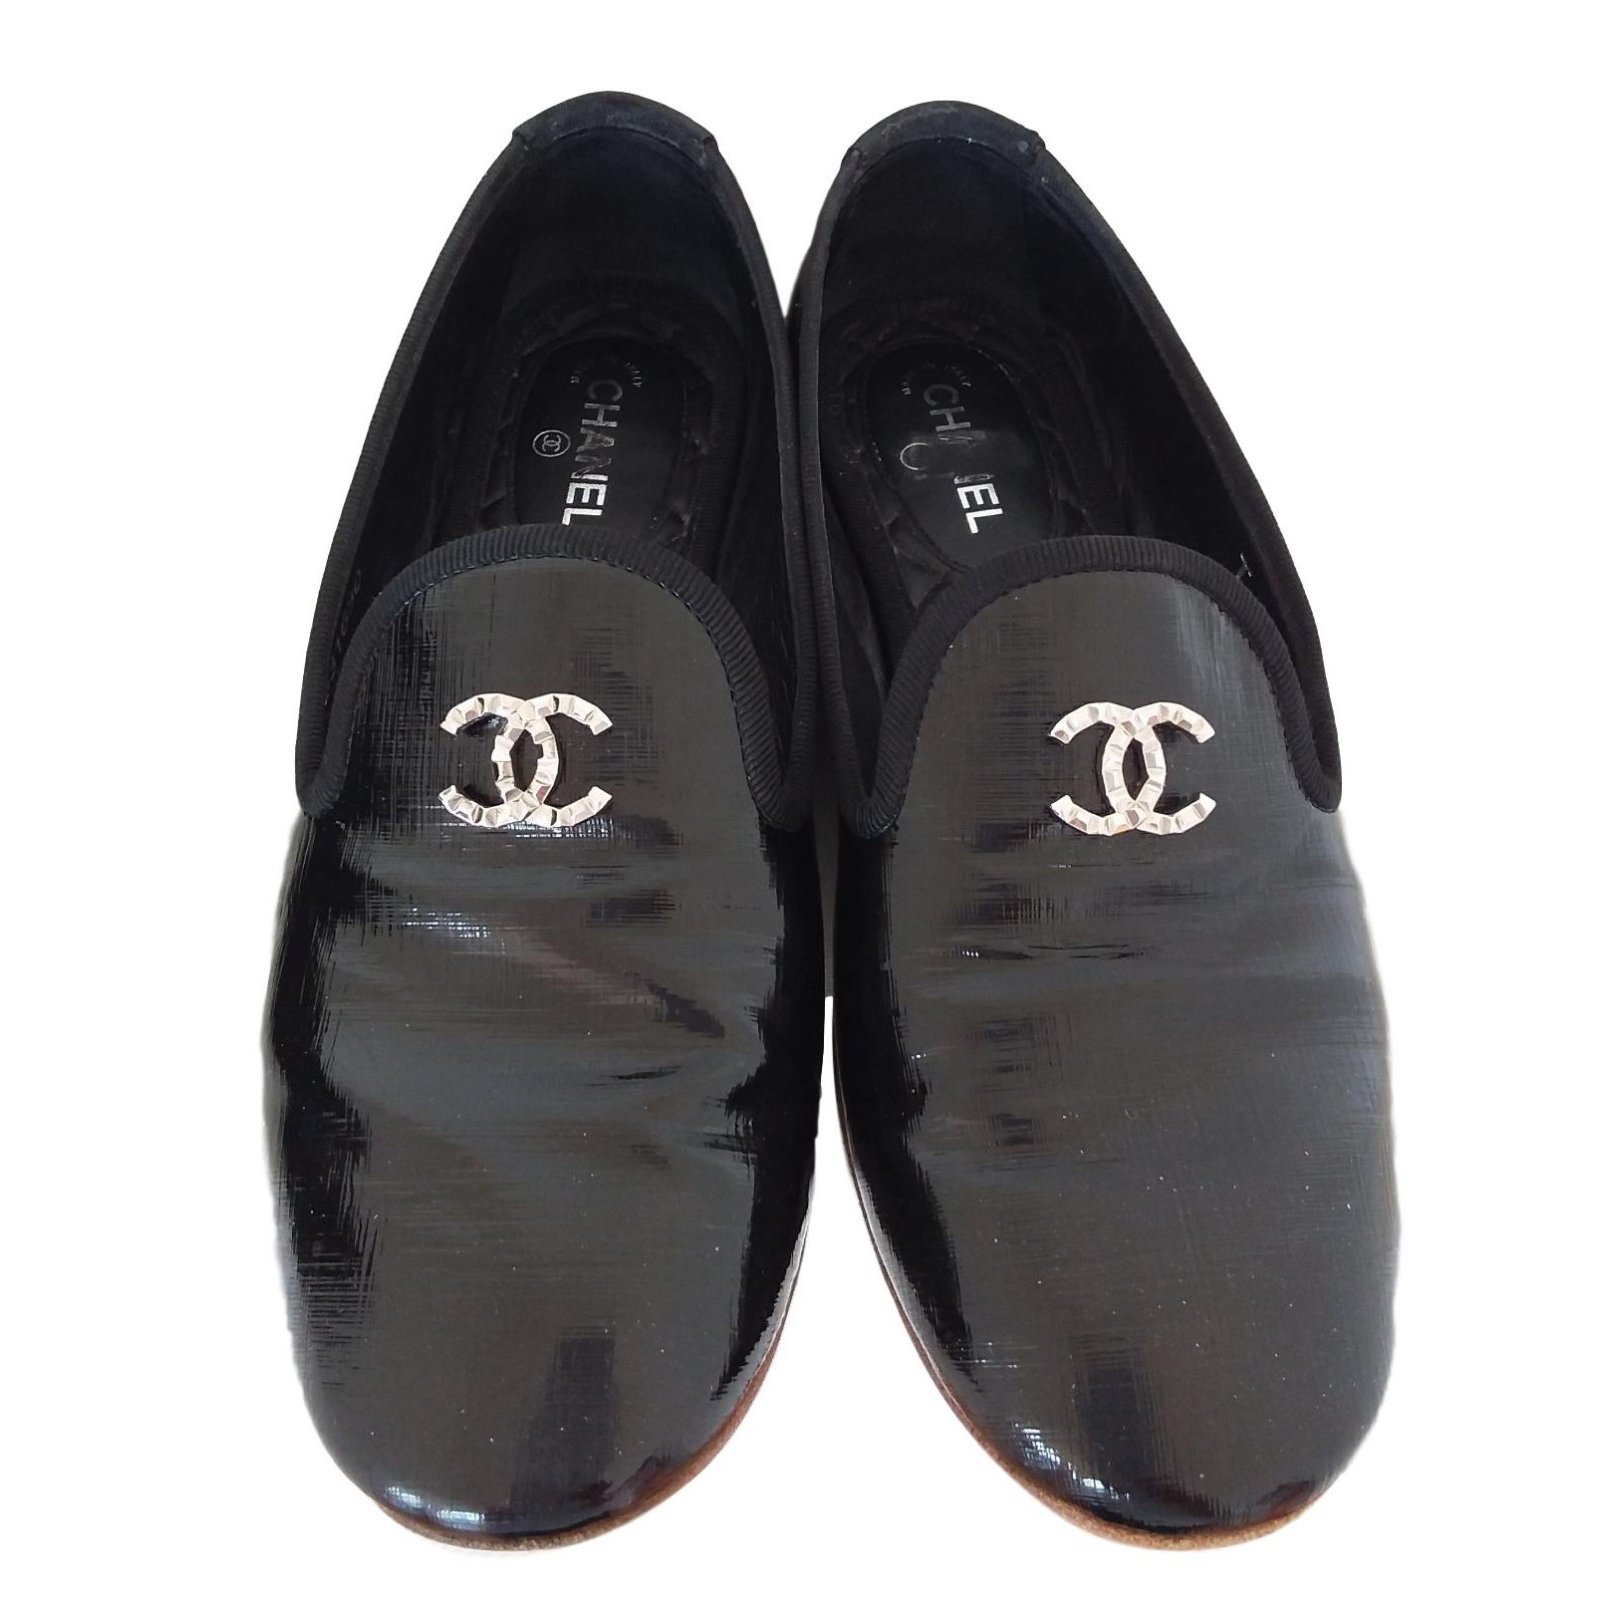 chanel patent loafers